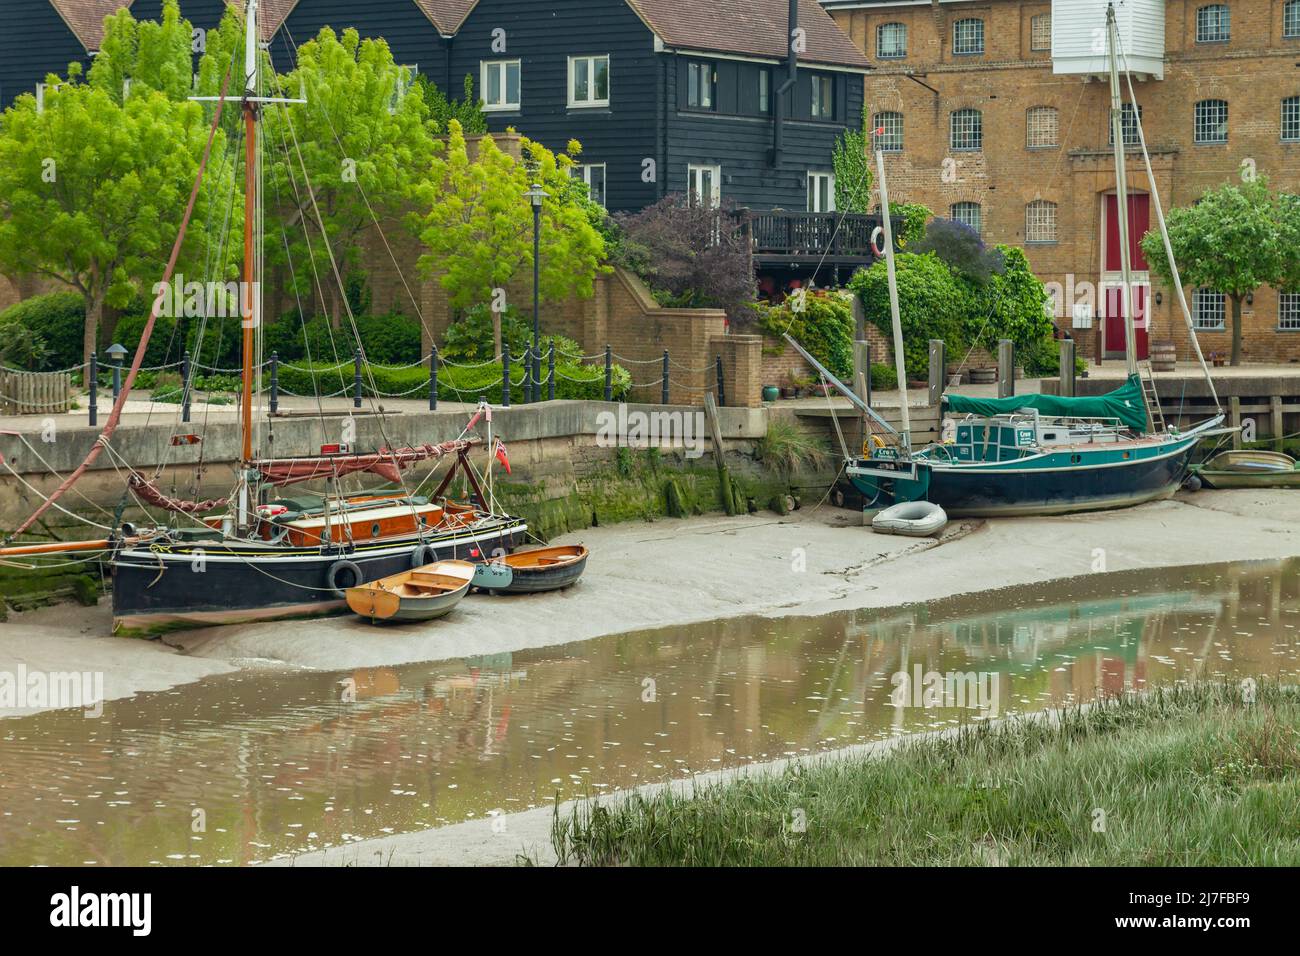 Low tide on river Medway in Faversham, Kent, England. Stock Photo